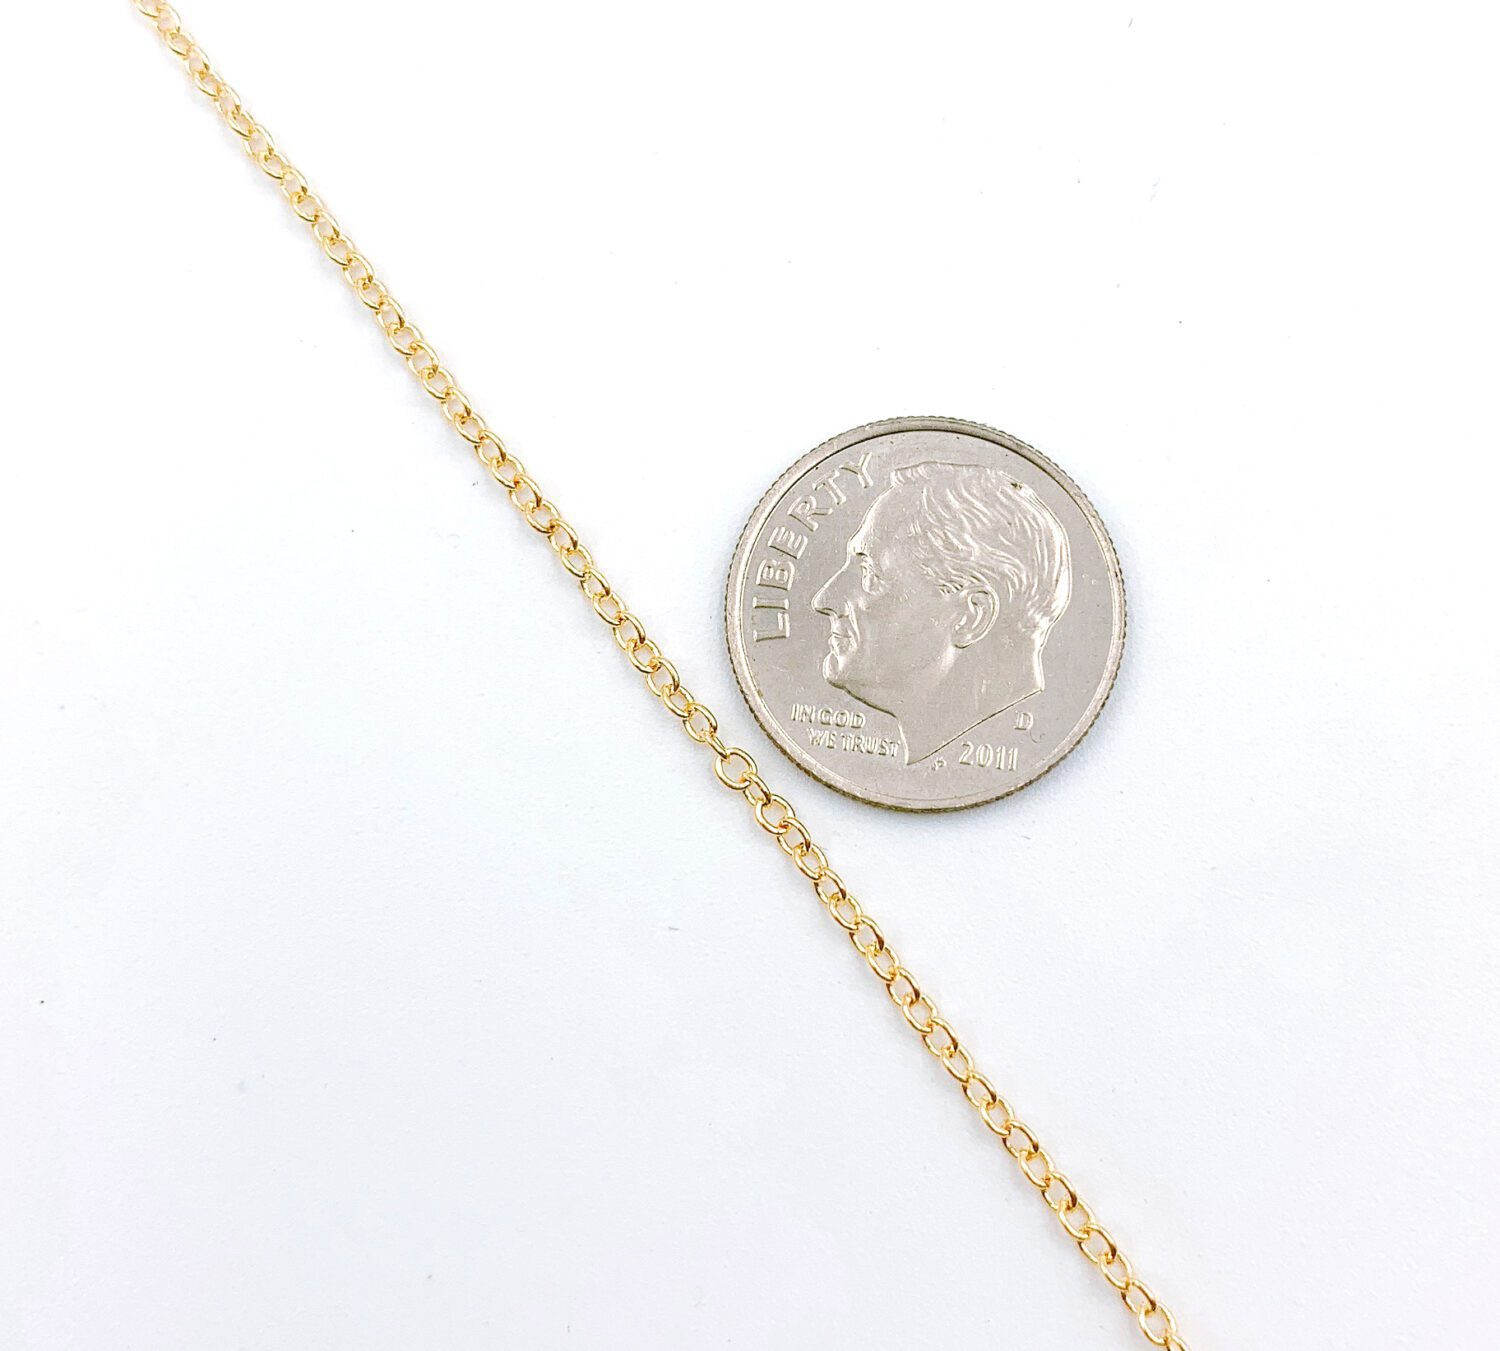 18K Gold Finished Necklace Chains, Flat Curb, Oval Bead, Station, Beaded,  Figaro, Satellite, Ball Chain, Cuban Curb, Chain Jewelry, Chain Jewelry,  CH_Batch2